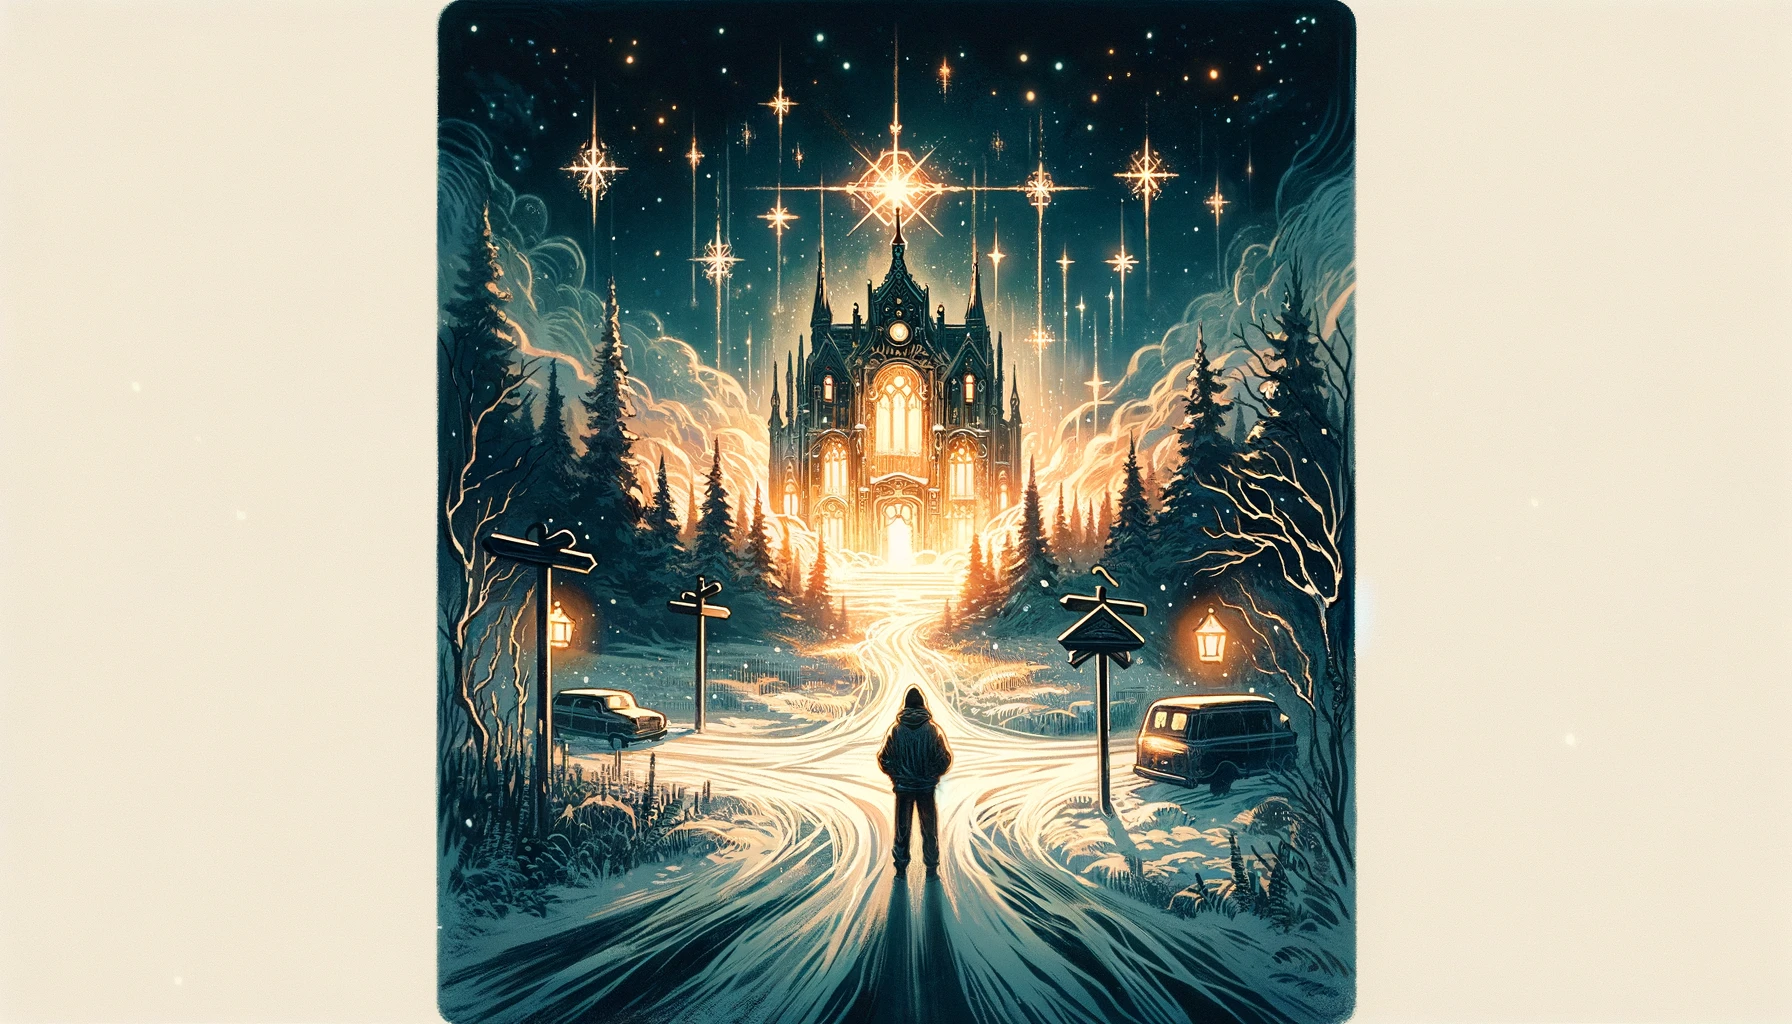 Individual at crossroads gazes towards warmly lit building in cold environment, symbolizing desire for security, support, and belonging. Captures essence of seeking assistance, overcoming adversity, and longing for valued support, themes of Five of Pentacles.